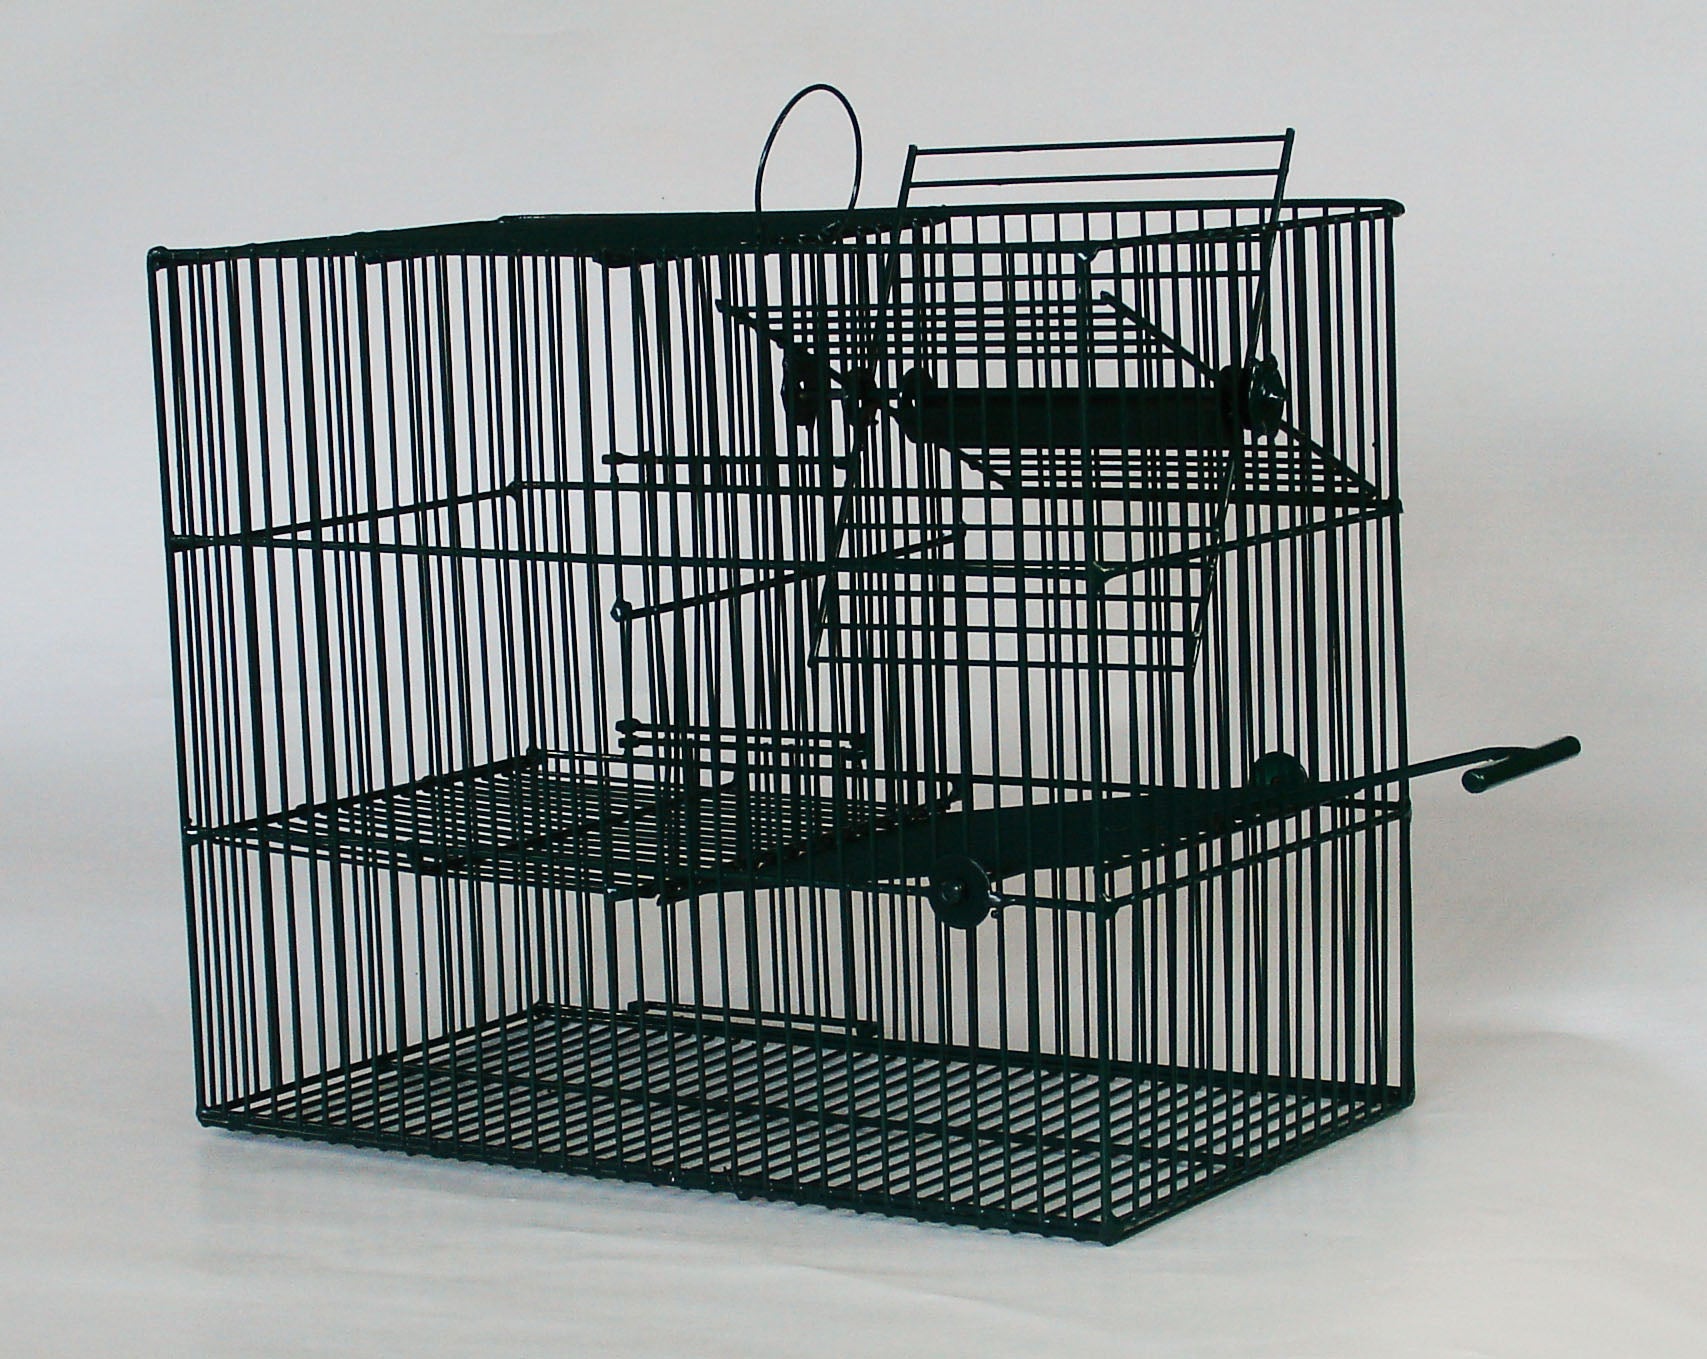 Bird-Trap for Mass Trapping